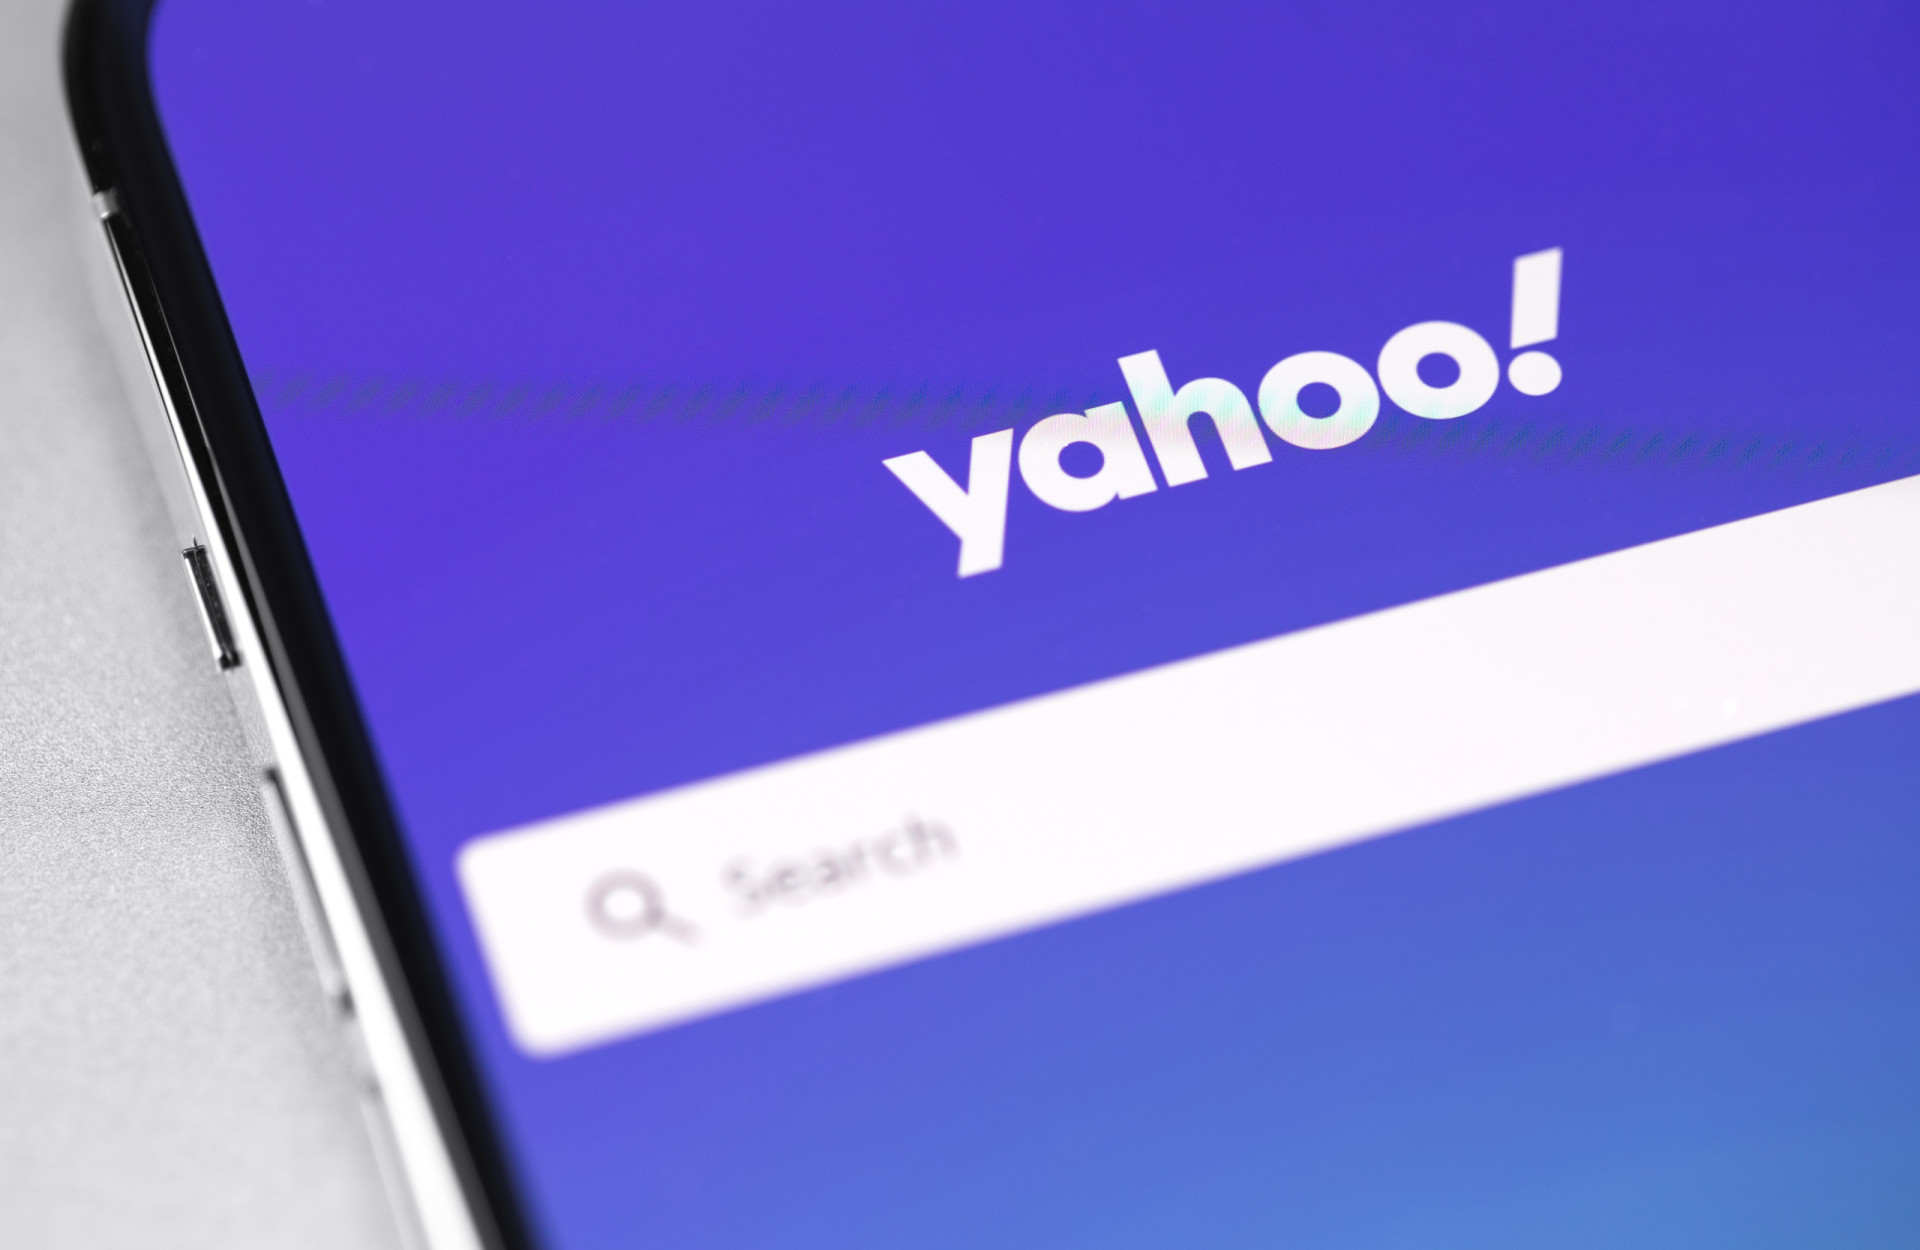 <p>You probably wouldn't have guessed this, but Yahoo! stands for "Yet Another Hierarchically Organized Oracle."</p><p>You may also like:<a href="https://www.starsinsider.com/n/345762?utm_source=msn.com&utm_medium=display&utm_campaign=referral_description&utm_content=537630en-en"> The craziest souvenirs actors have taken from set </a></p>